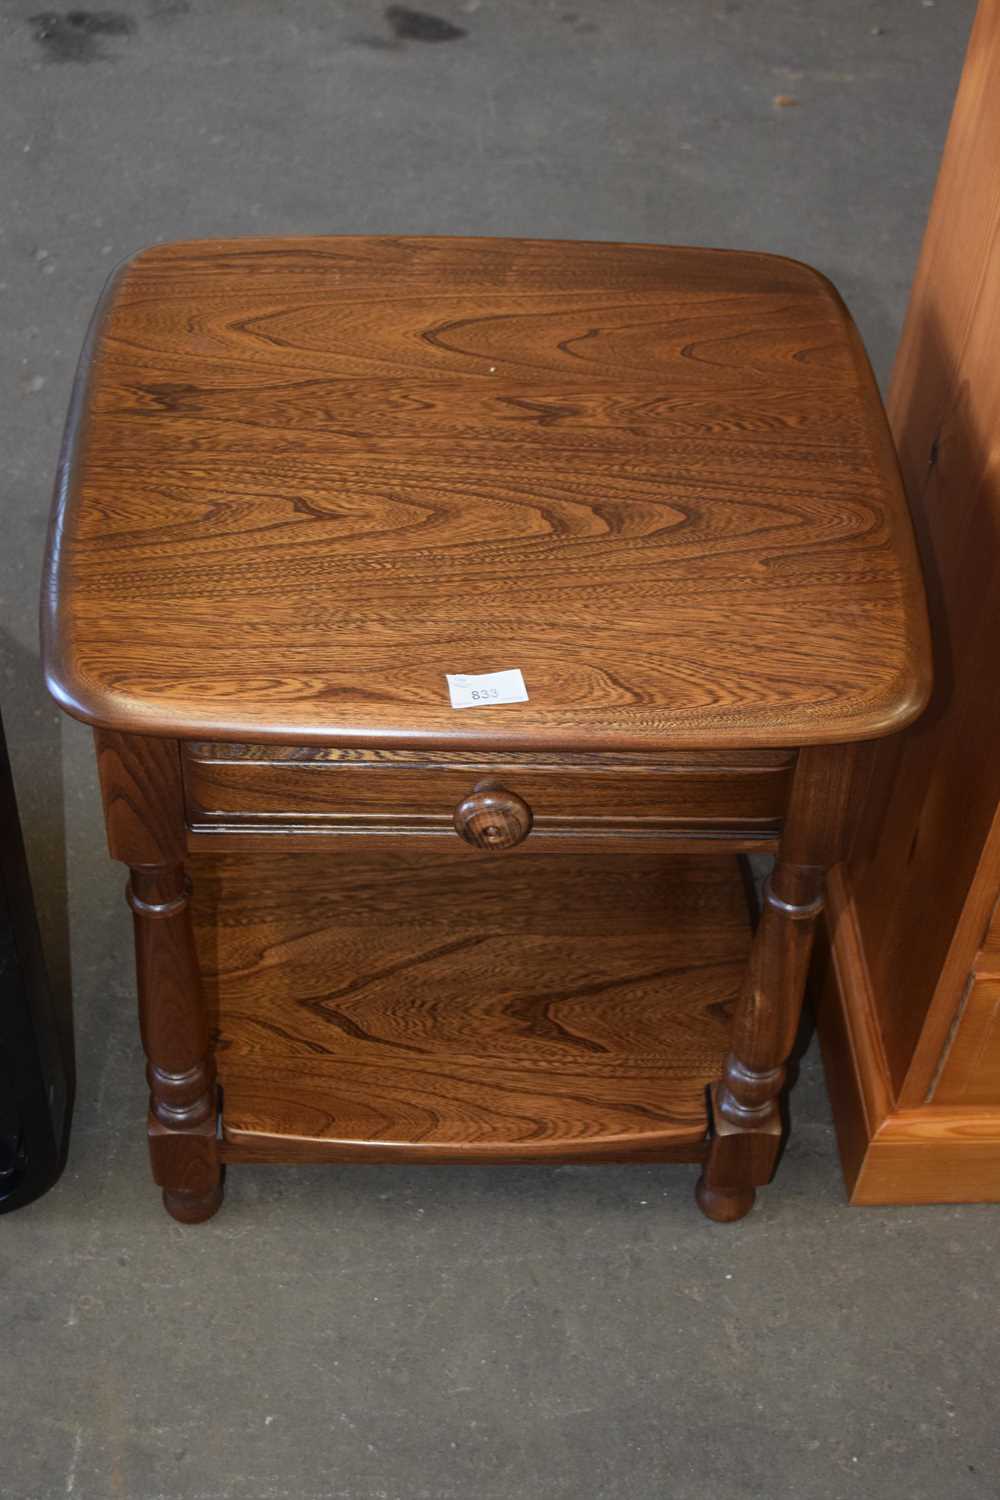 An Ercol bedside table